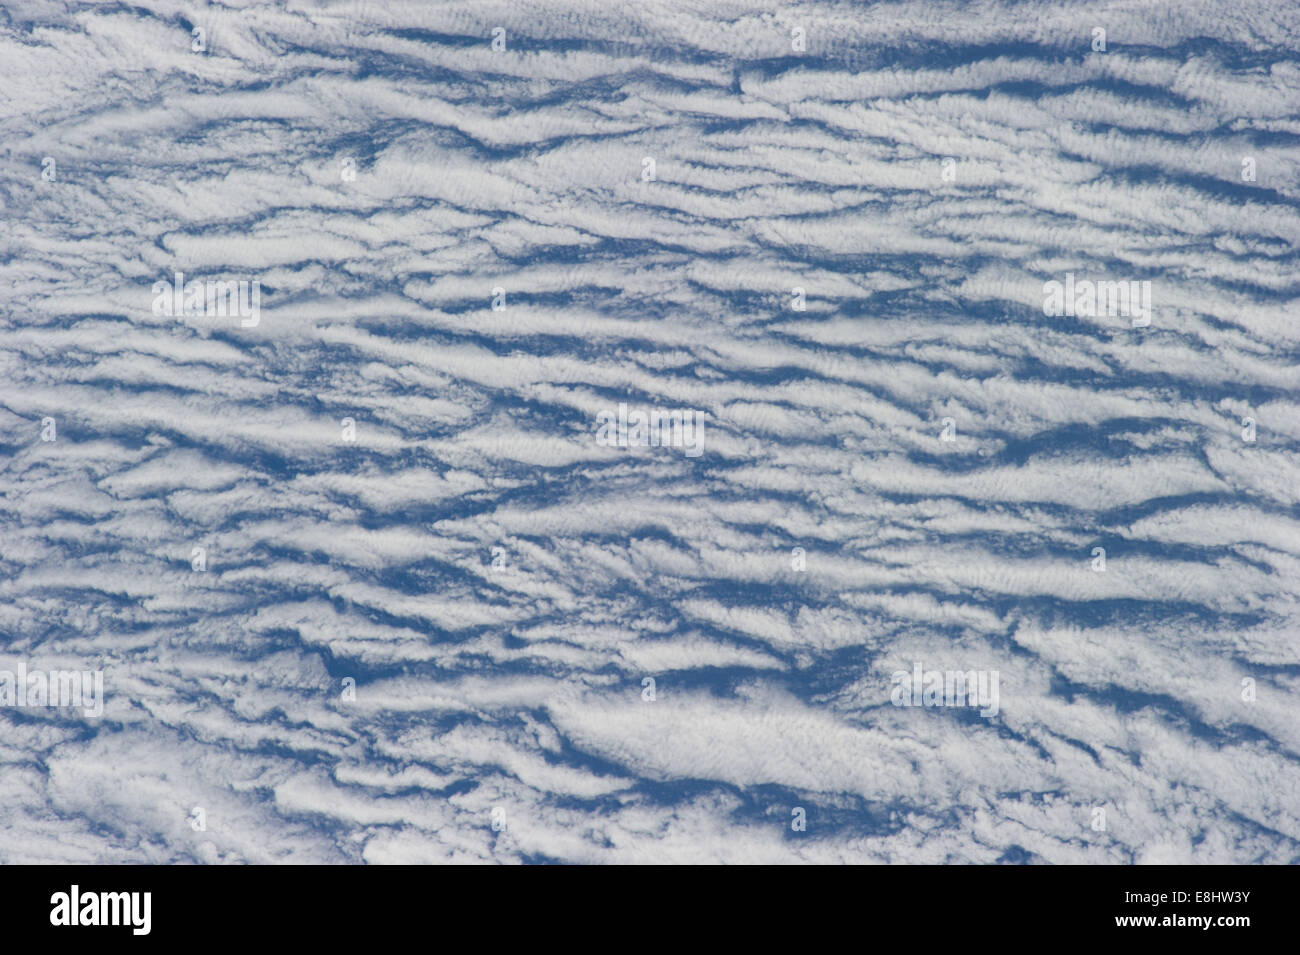 One of the Expedition 36 crew members aboard the International Space Station photographed this unusual image of what appear to b Stock Photo